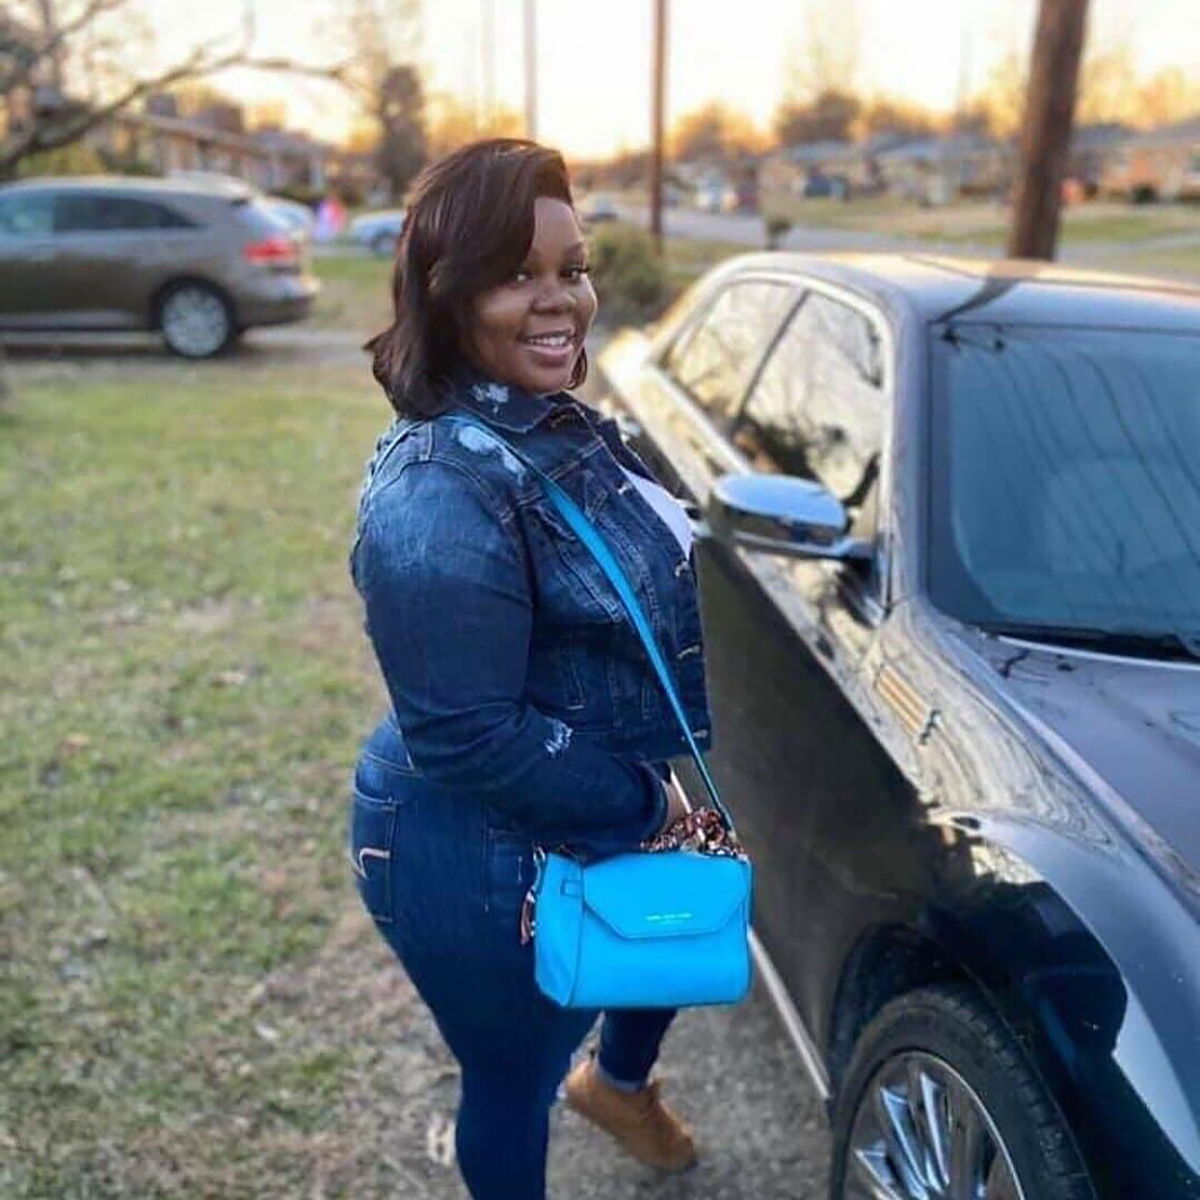 <i>Courtesy Ben Crump</i><br/>A photo of Breonna Taylor provided by Attorney Ben Crump. Four current and former Louisville Metro Police Department officers involved in the deadly raid on Breonna Taylor's home were arrested on August 4 and charged with civil rights offenses